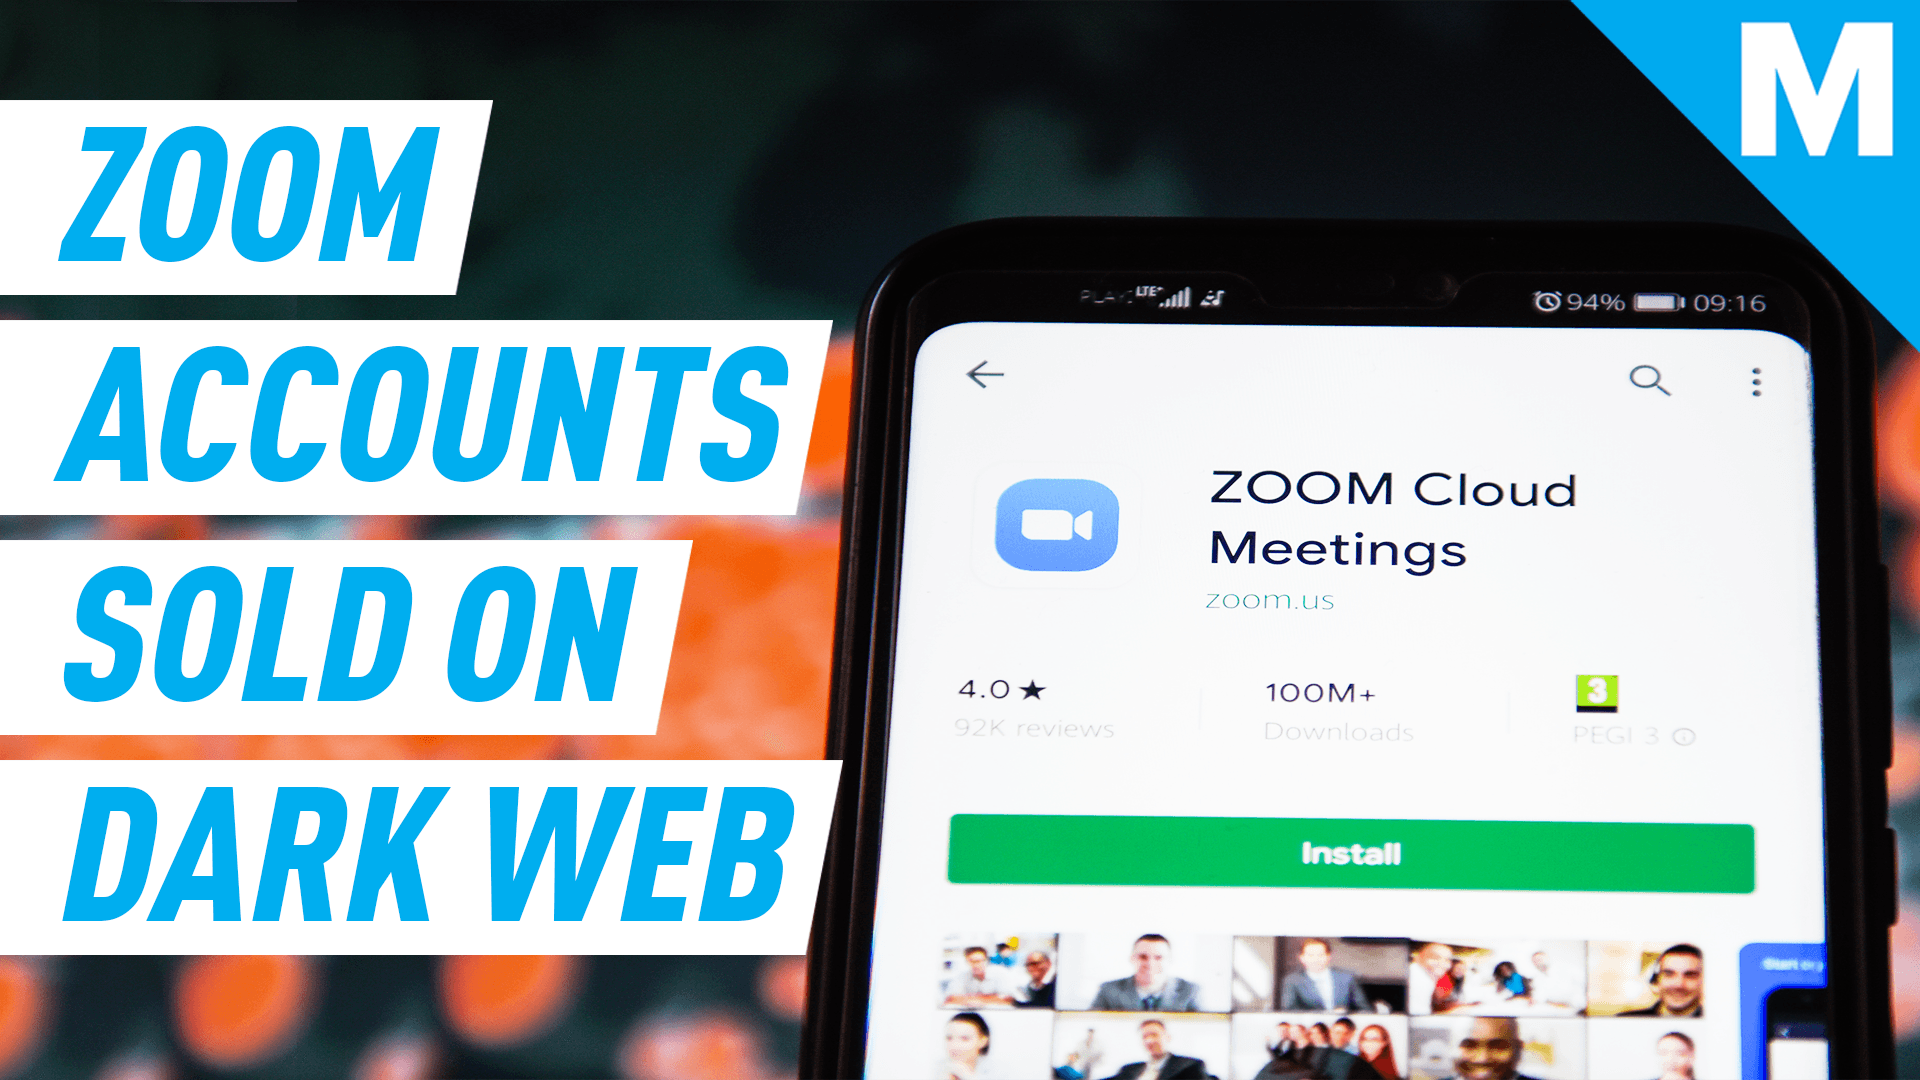 Thousands of Zoom accounts are being sold on dark web